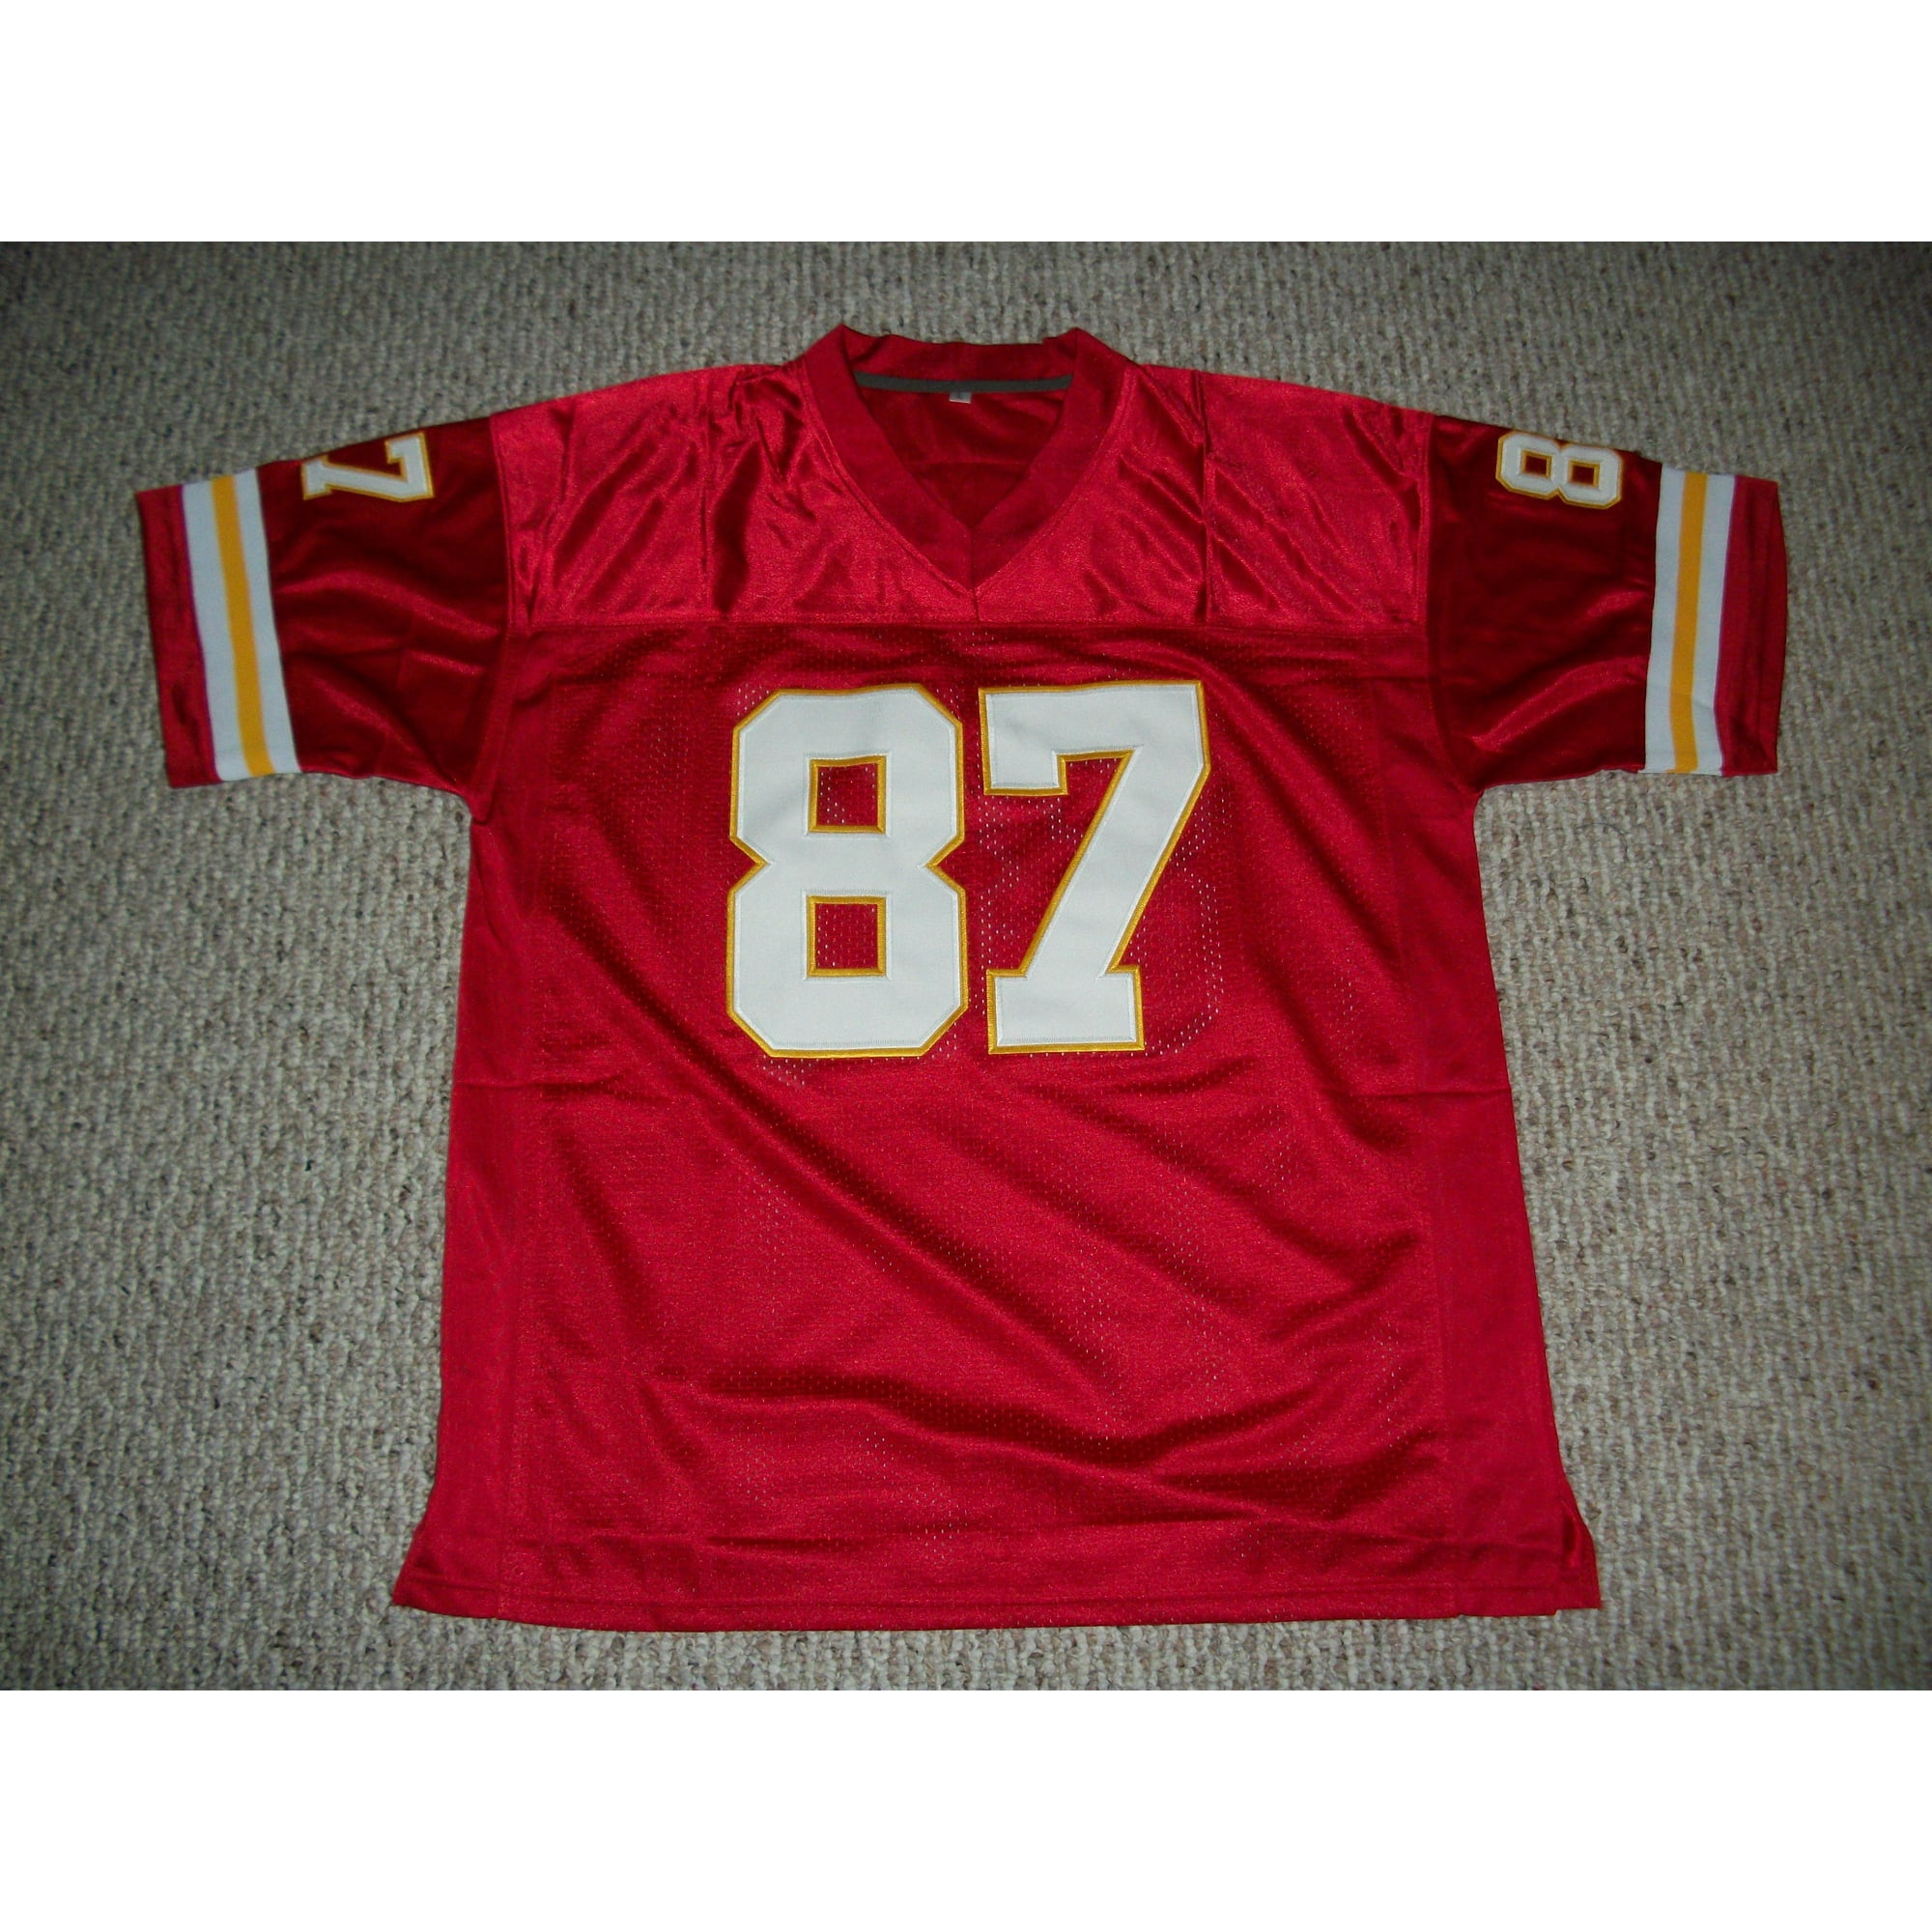 kelce jersey number